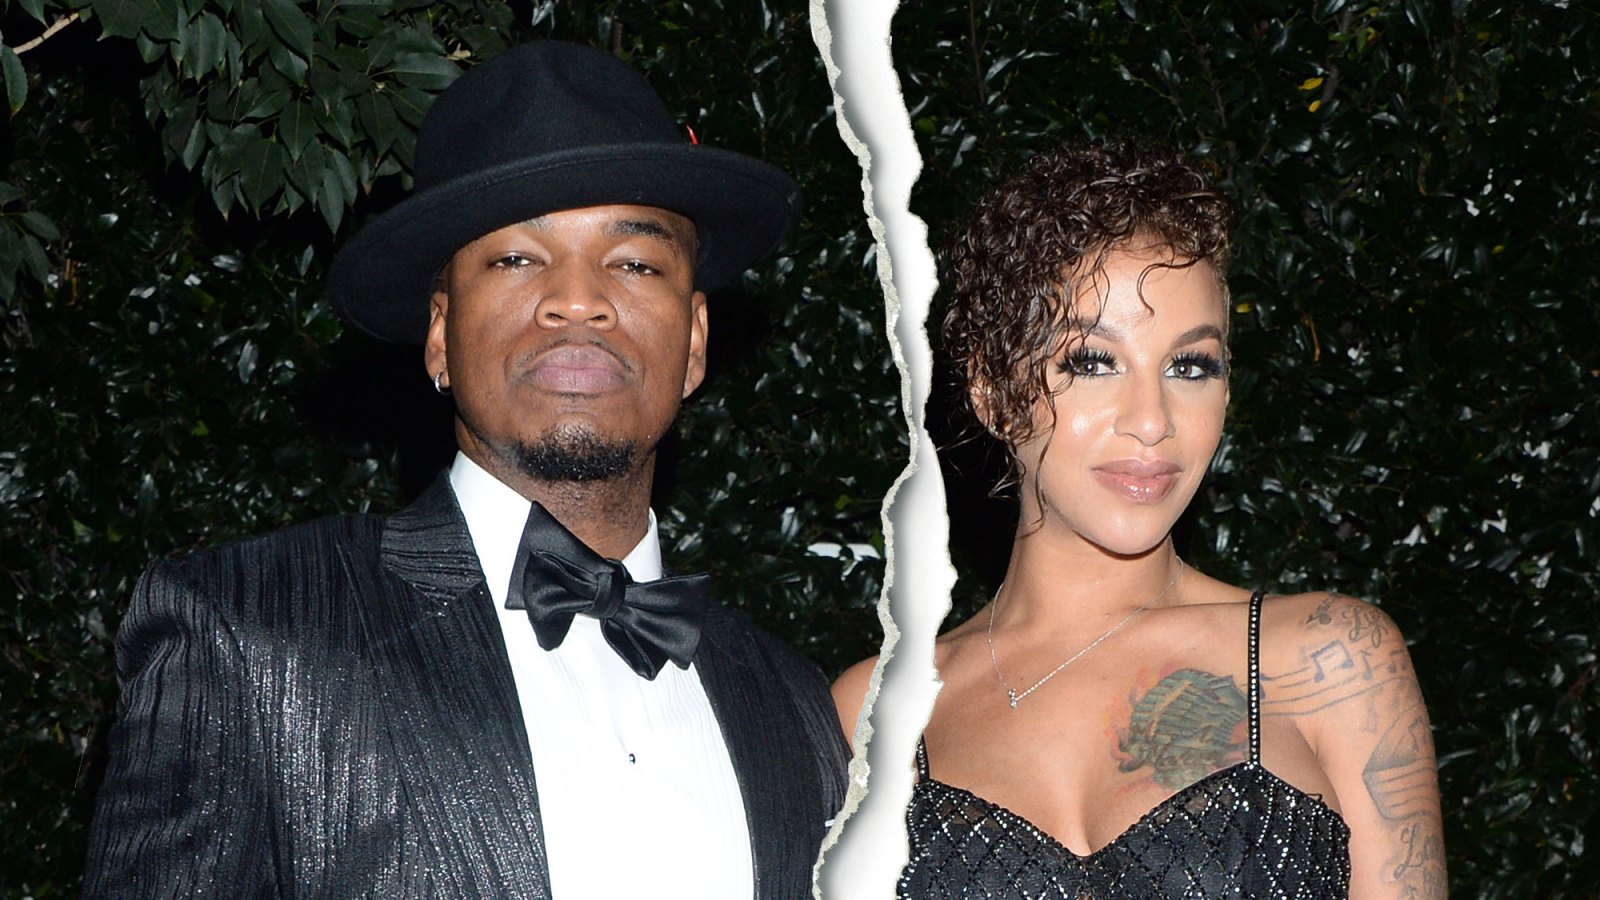 Ne-Yo Confirms He and Wife Crystal Renay Have Split, Are Divorcing